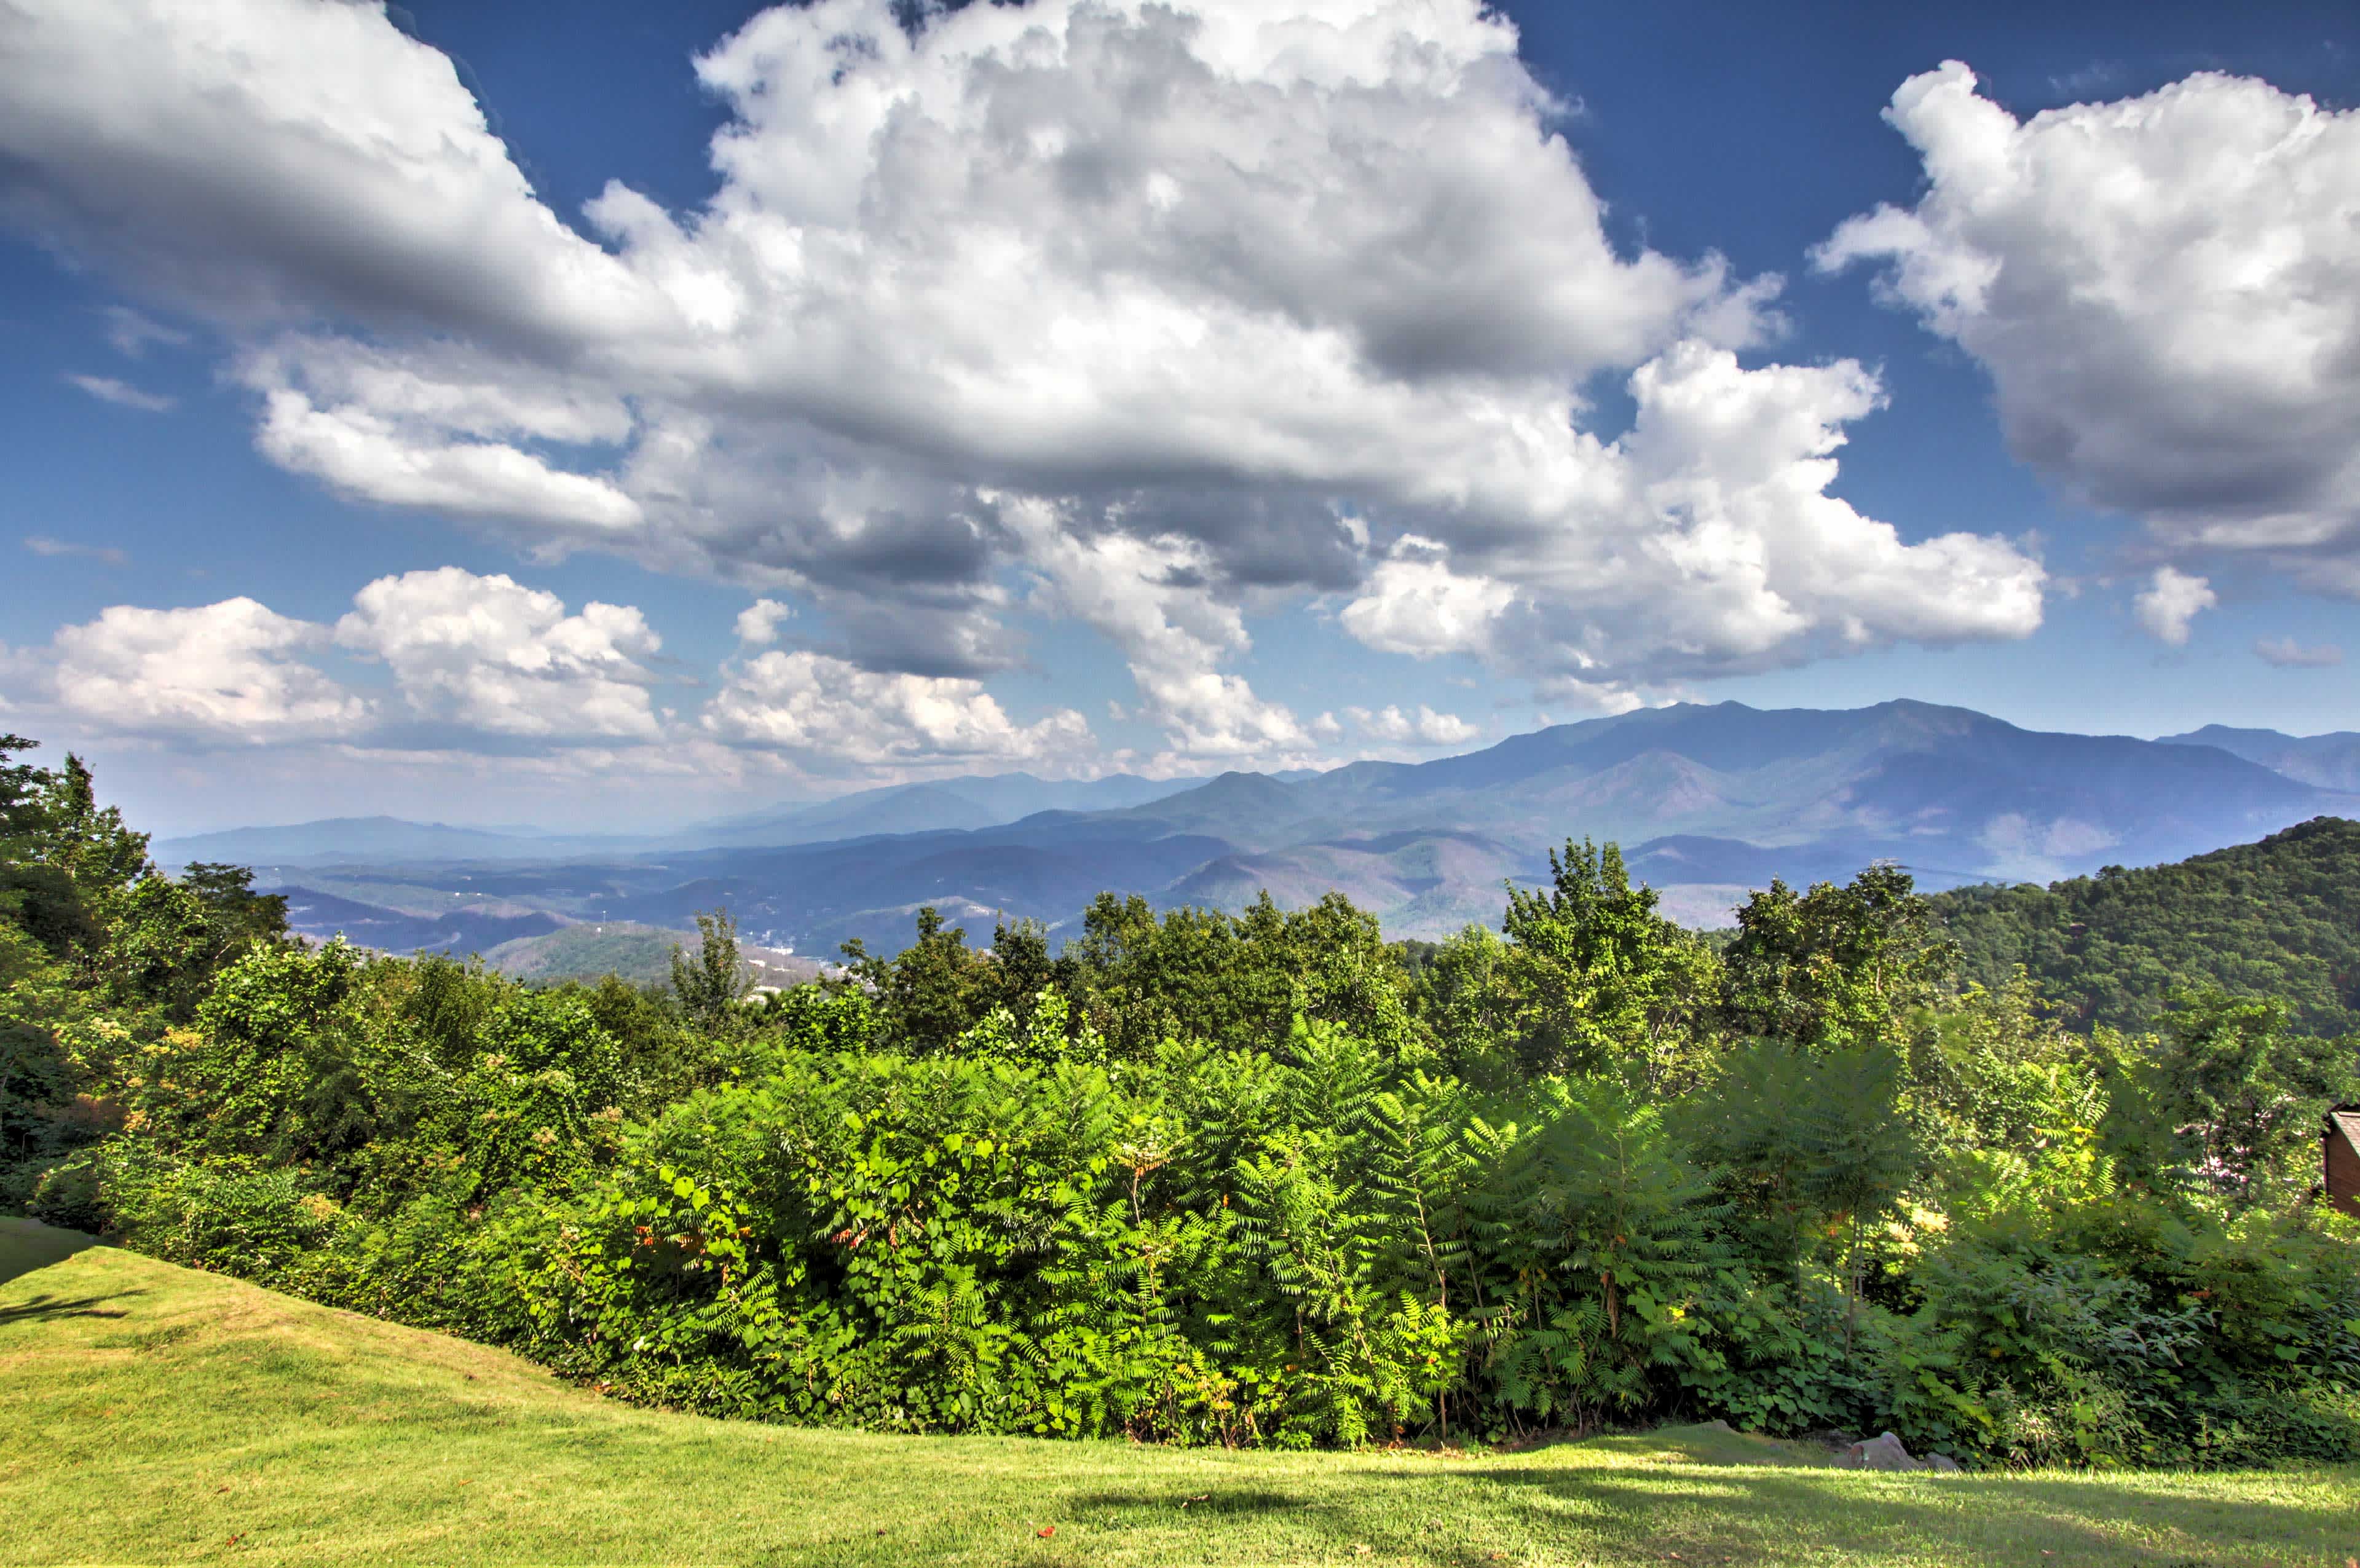 Mountain view with greenery in the foreground in Pigeon Forge, TN